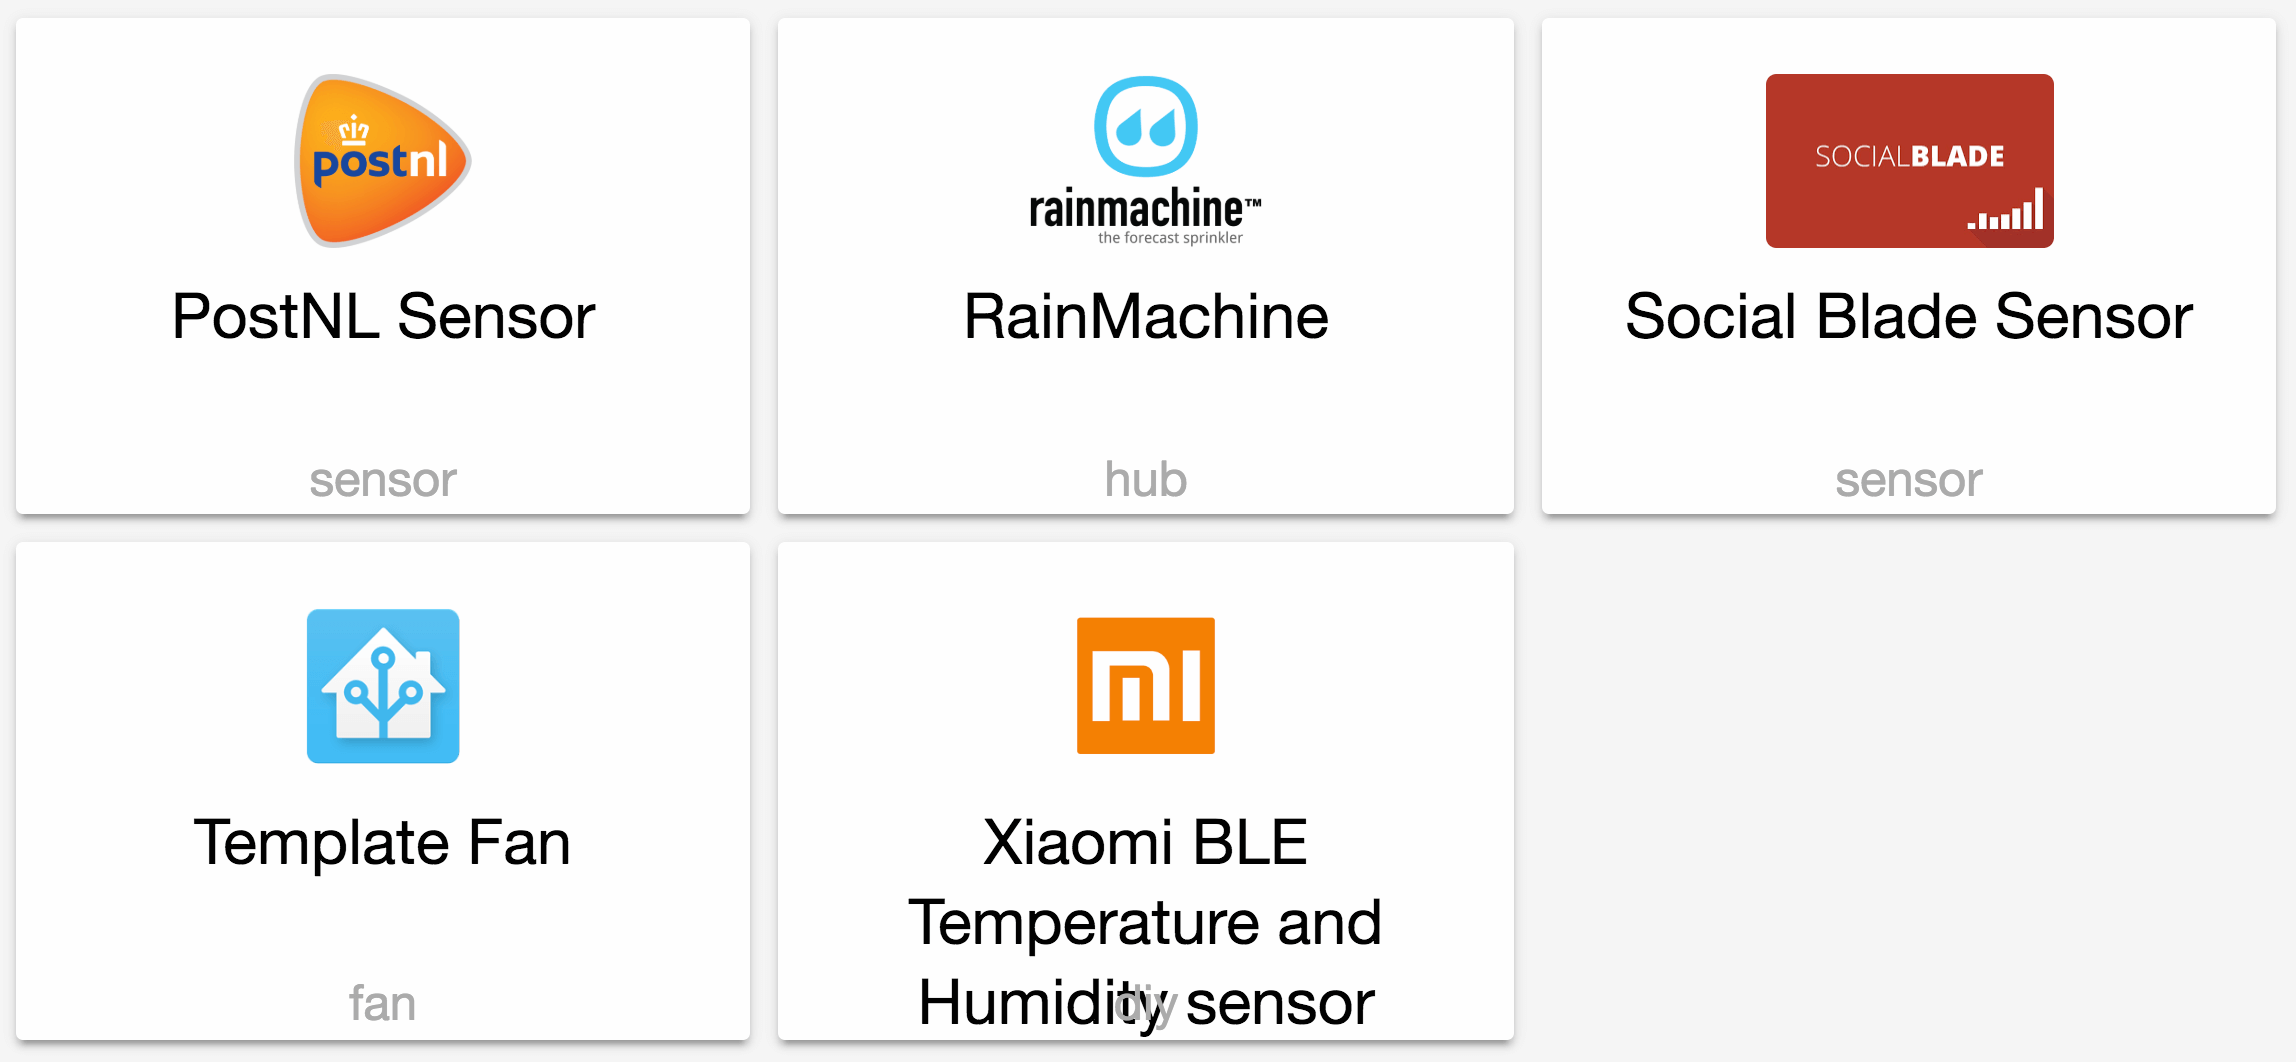 mijia home assistant